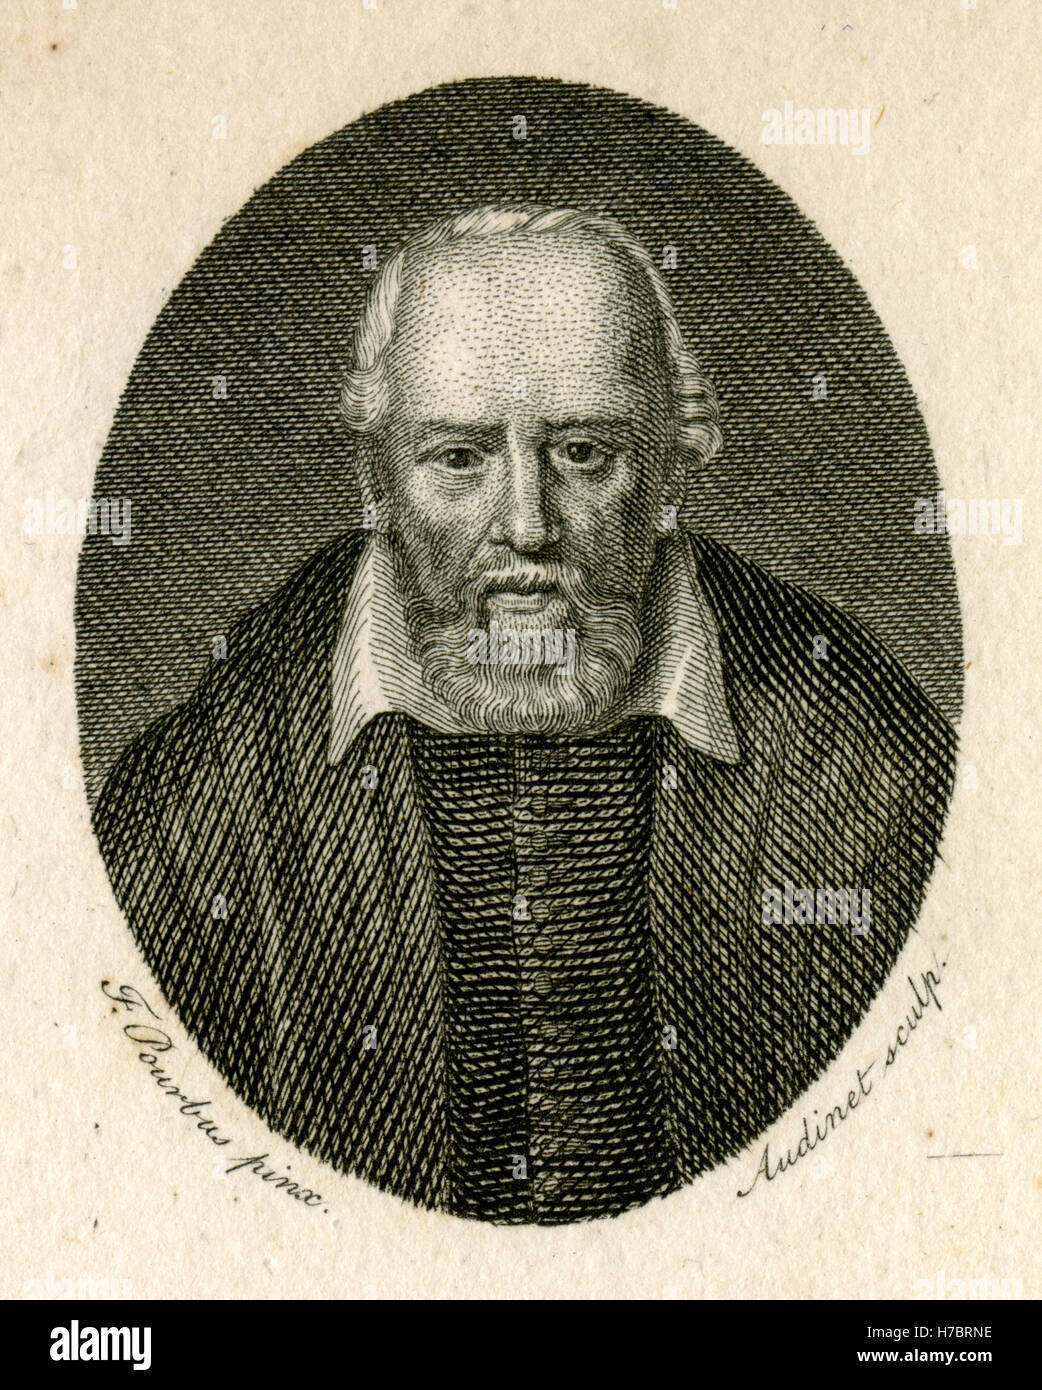 Antique 1794 engraving, George Buchanan. George Buchanan (1506-1582) was a Scottish historian and humanist scholar. According to historian Keith Brown, Buchanan was 'the most profound intellectual sixteenth century Scotland produced.' His ideology of resistance to royal usurpation gained widespread acceptance during the Scottish Reformation. Brown says the ease with which King James VII was deposed in 1689 shows the power of Buchananite ideas. SOURCE: ORIGINAL ENGRAVING. Stock Photo